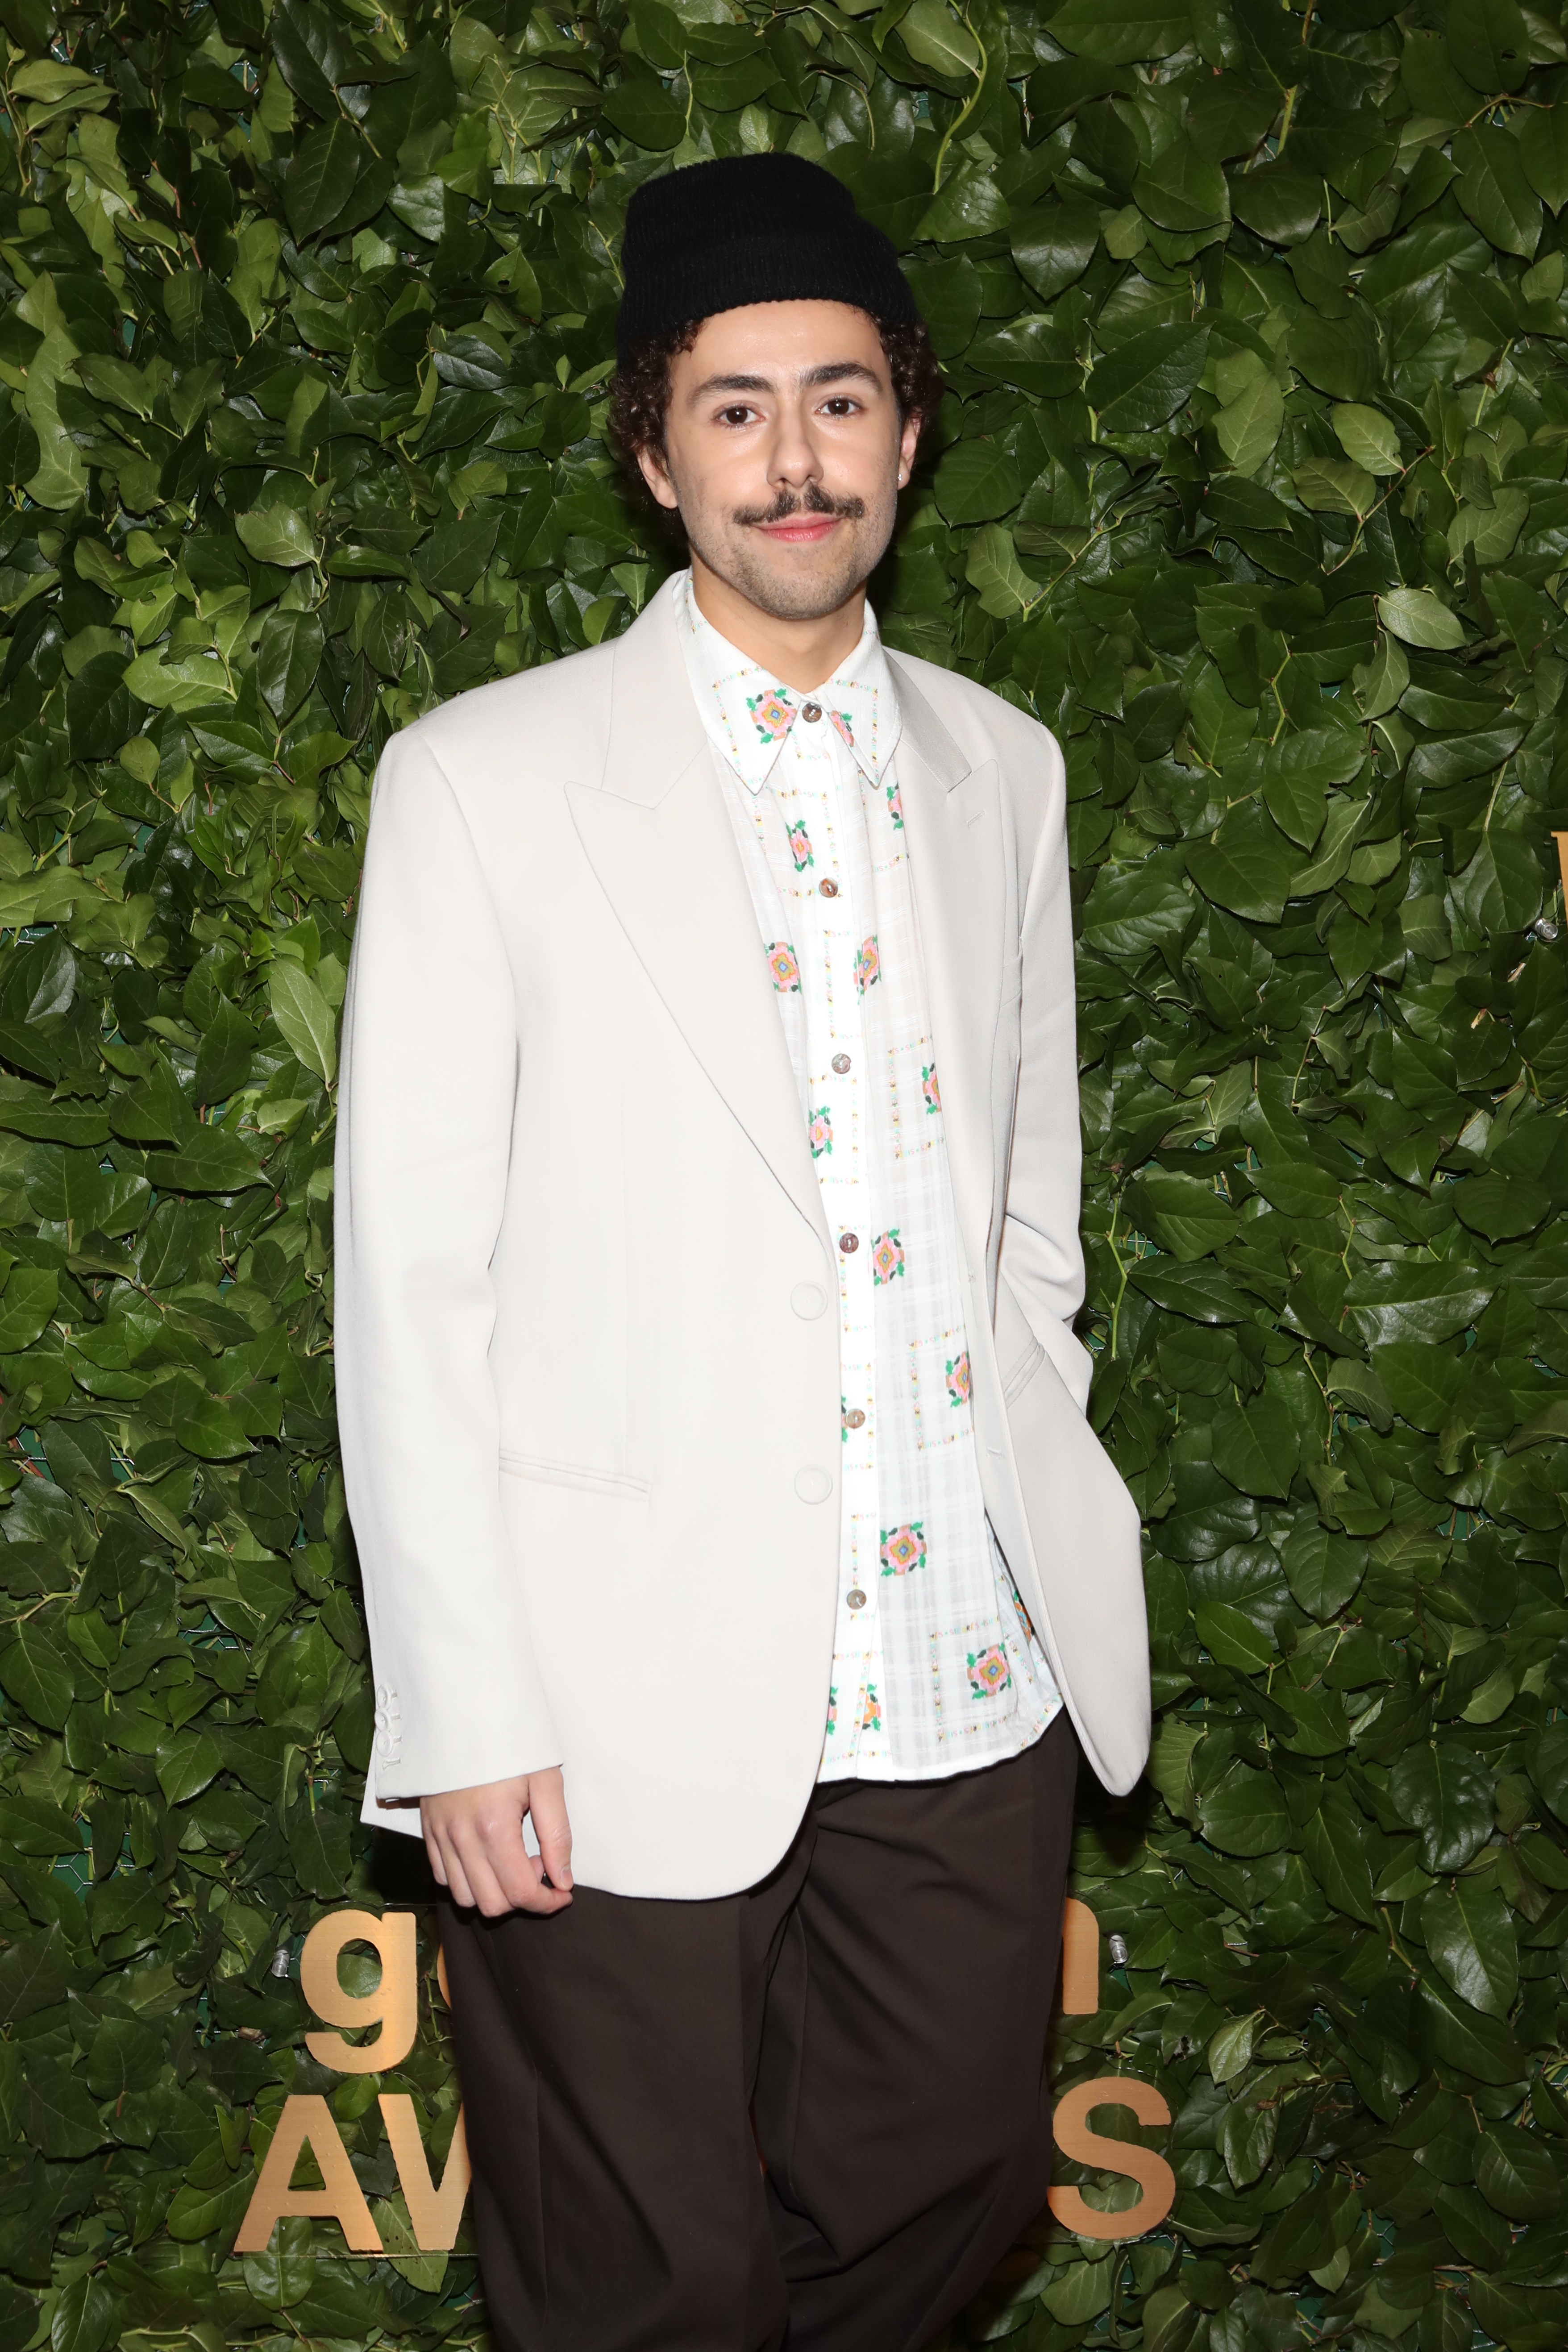 Ramy Youssef at the 2022 Gotham Awards on November 28, 2022, in New York City. | Source: Getty Images